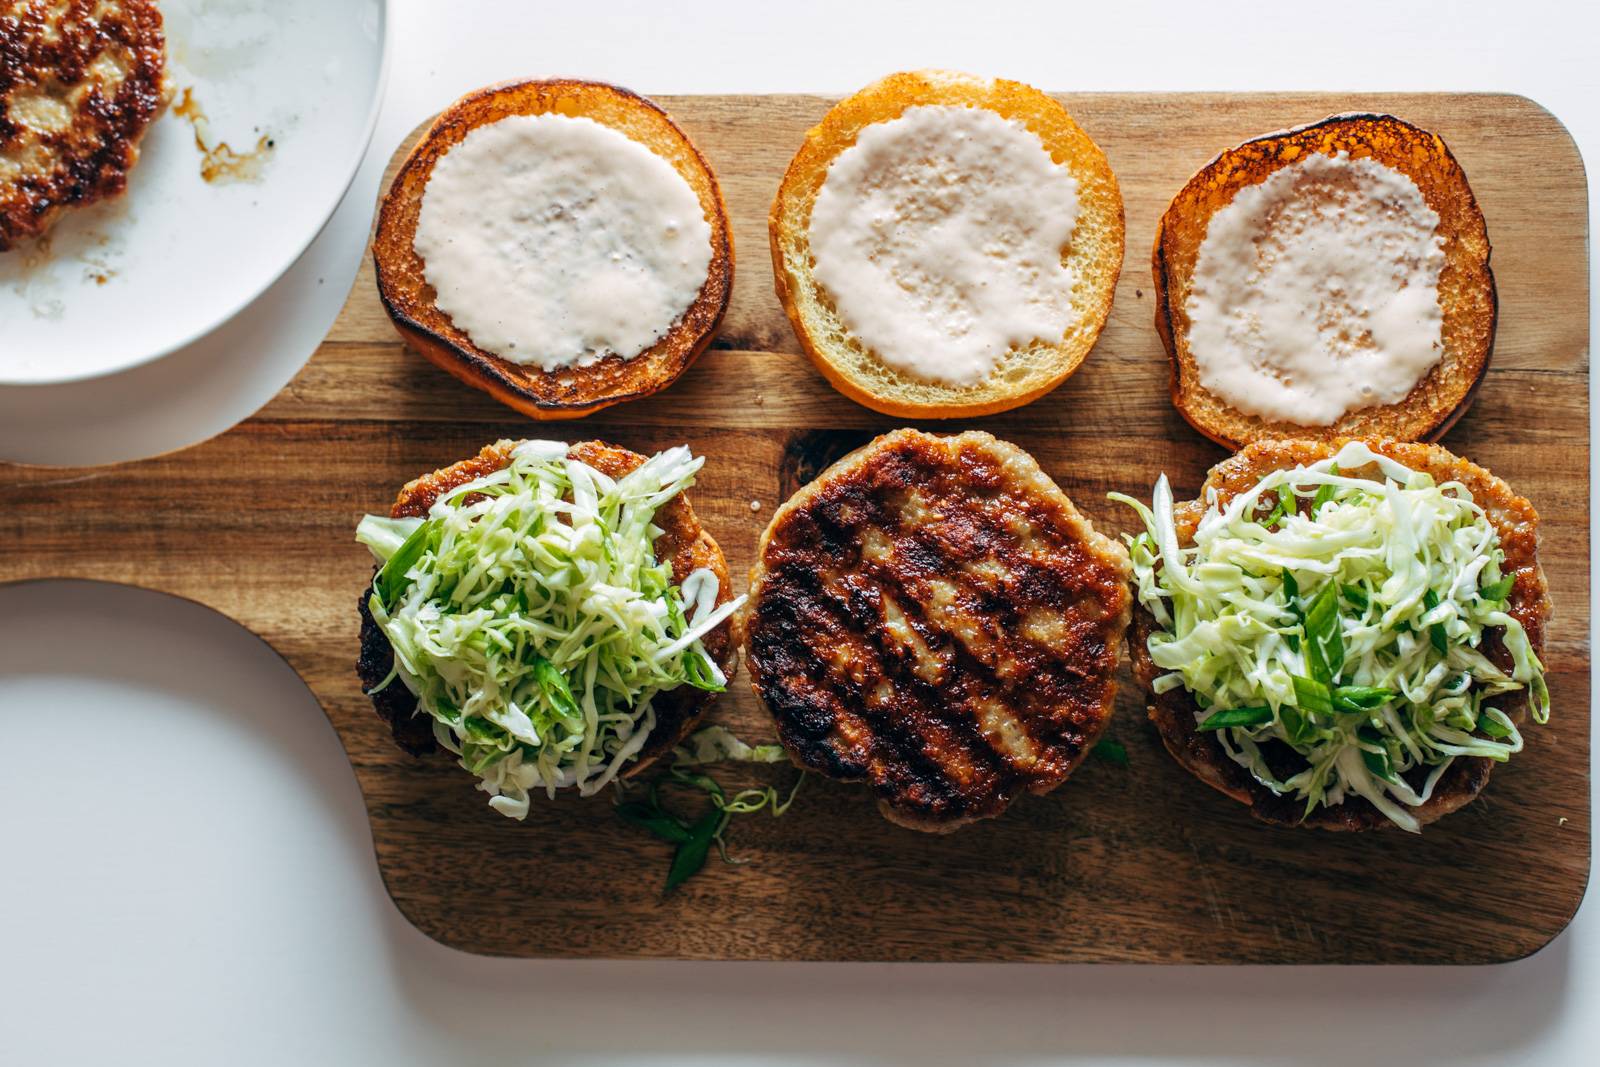 Assembling chicken burgers with buns, mayo, and slaw on a wooden serving board.